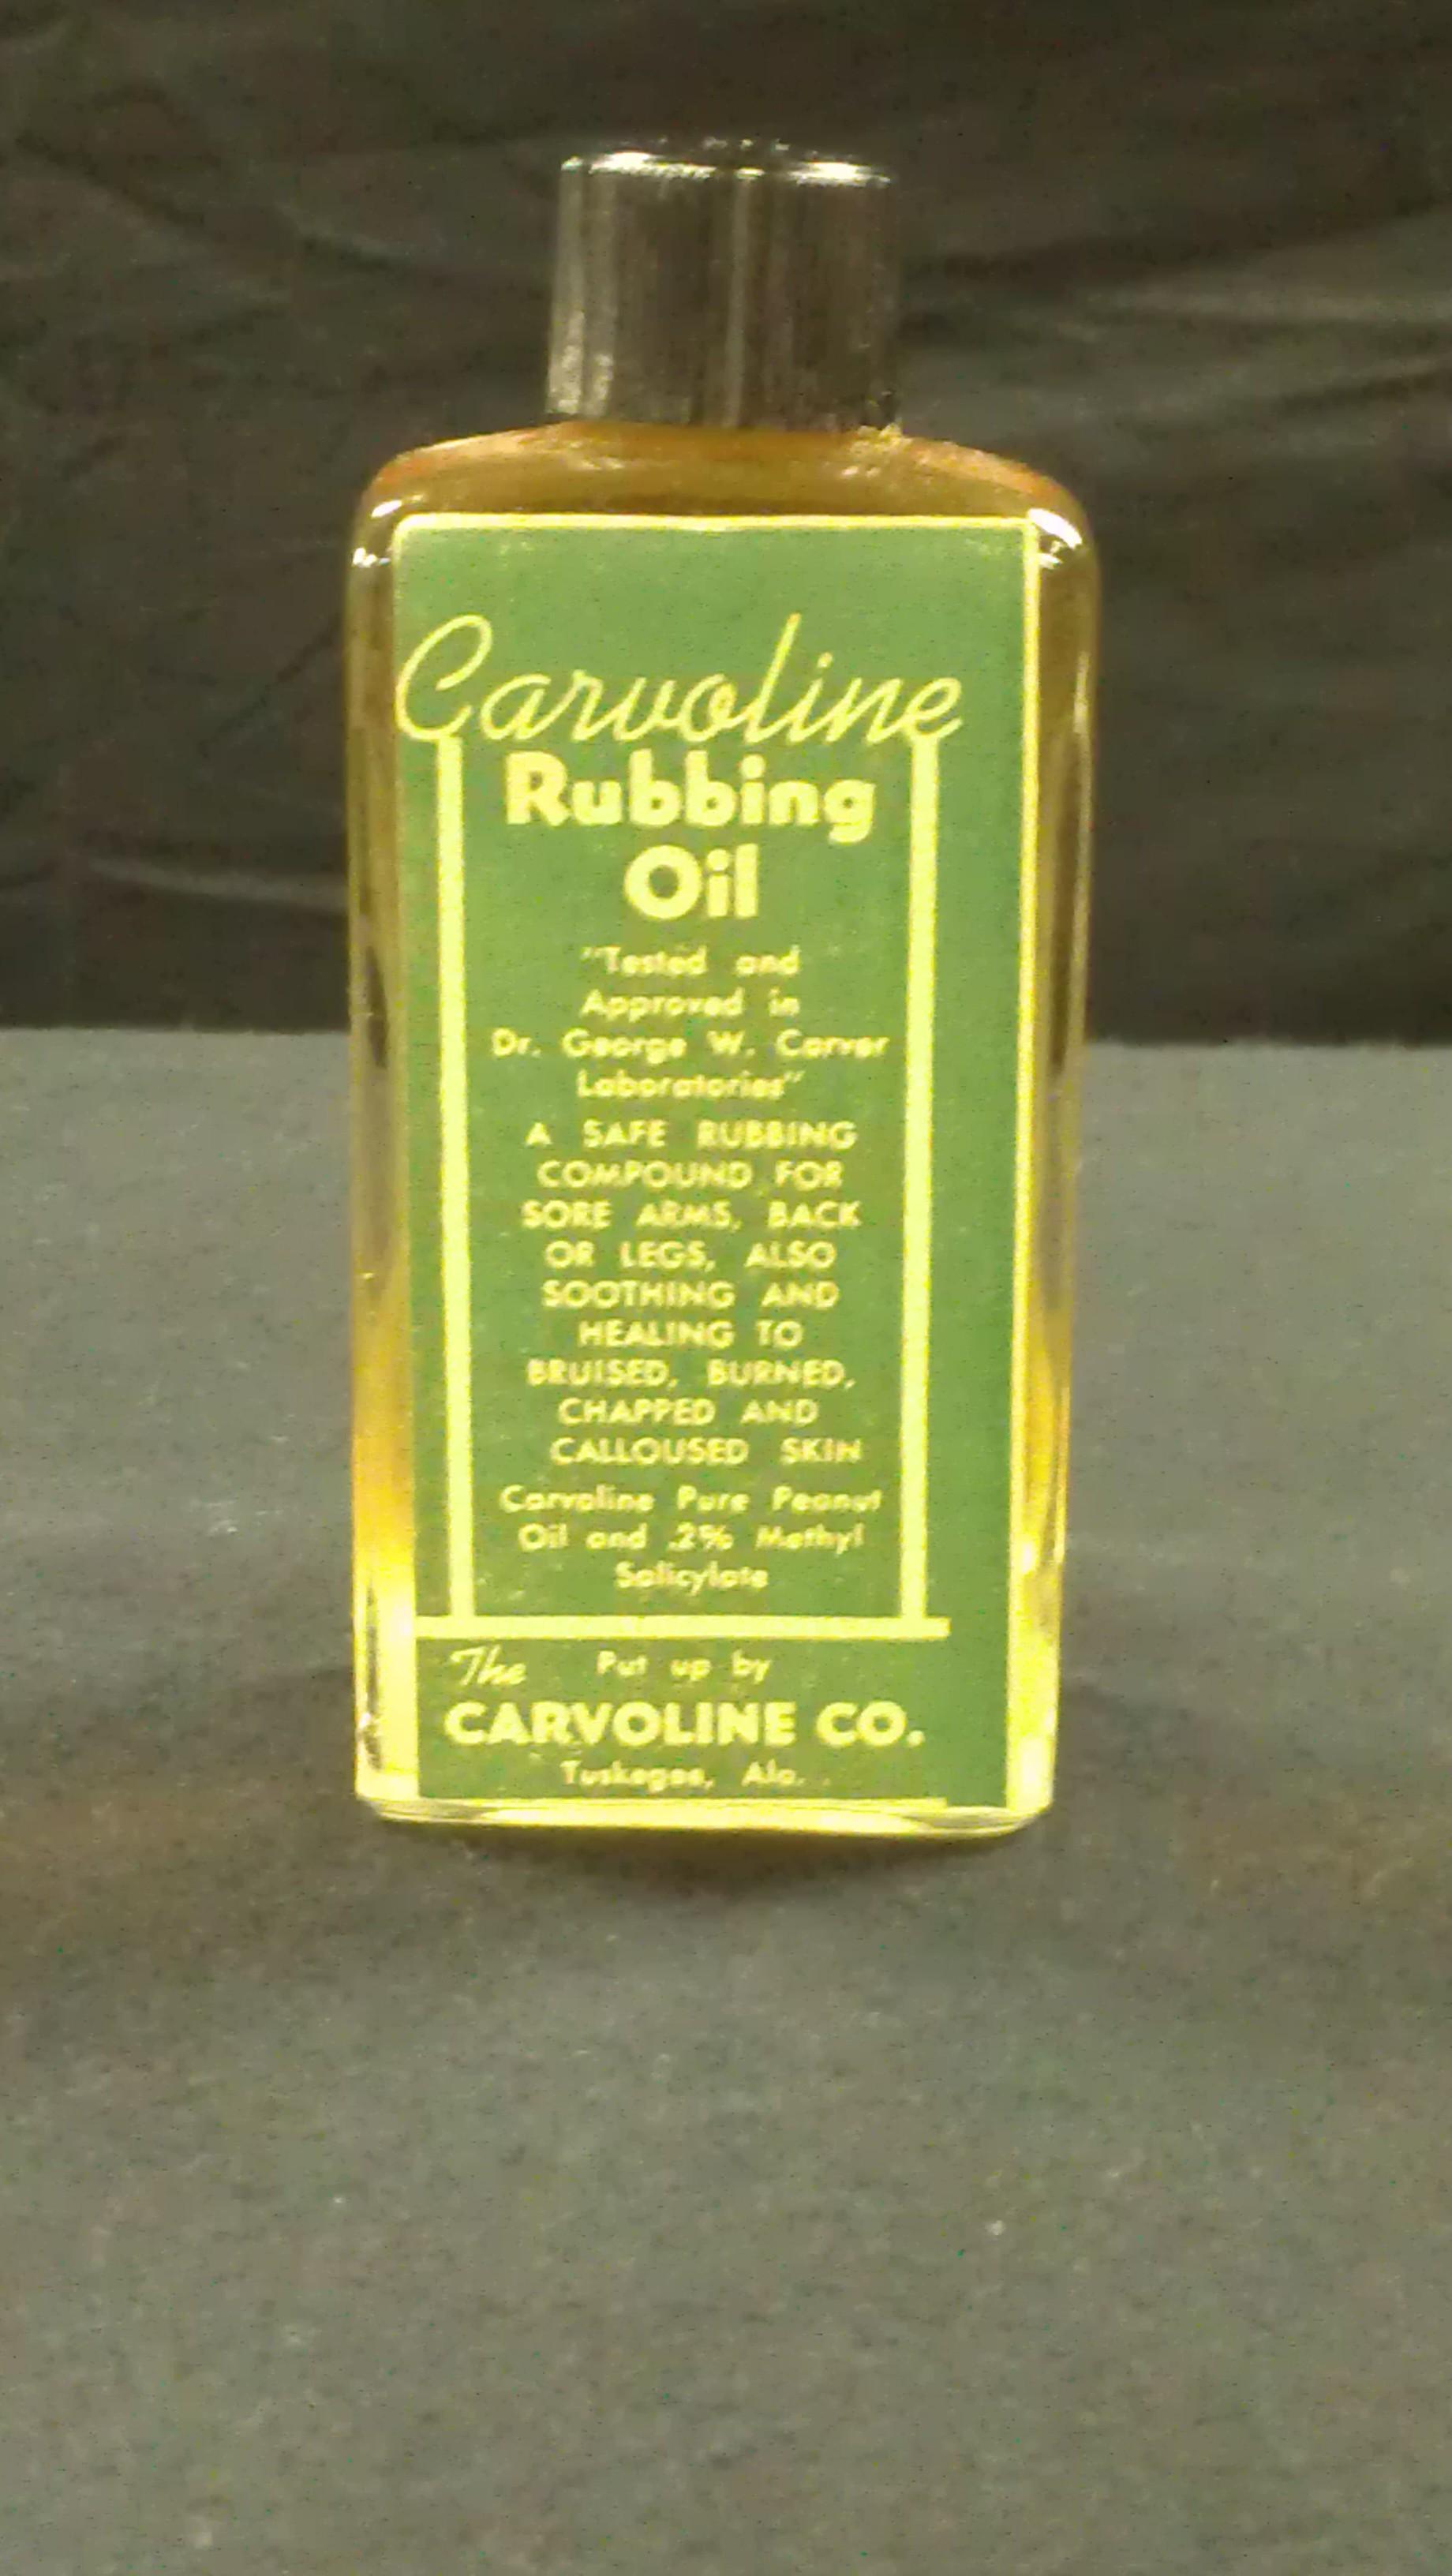 Bottle of Peanut Oil with green label - one of Dr. Carver's many uses for the peanut